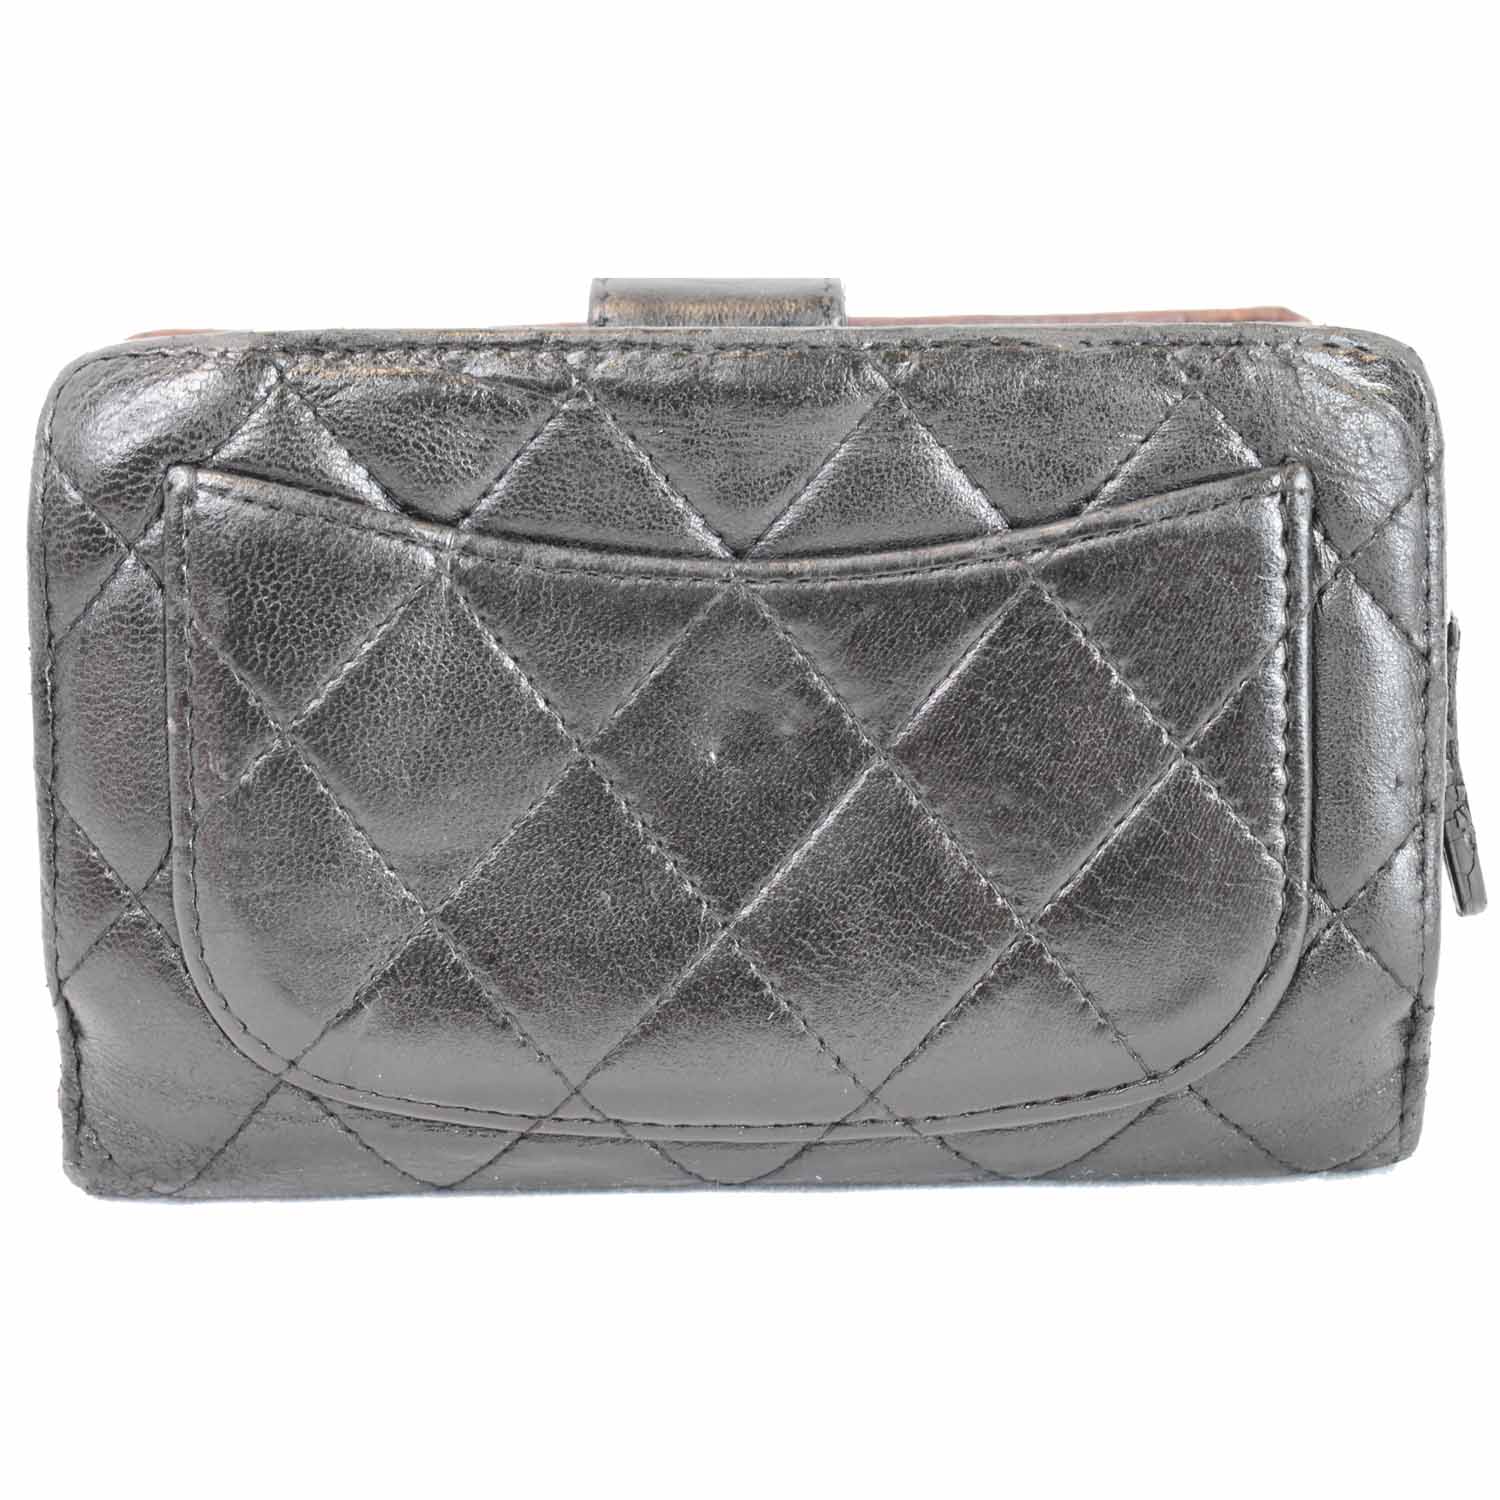 Chanel Metallic Lambskin Quilted CC Card Holder Silver